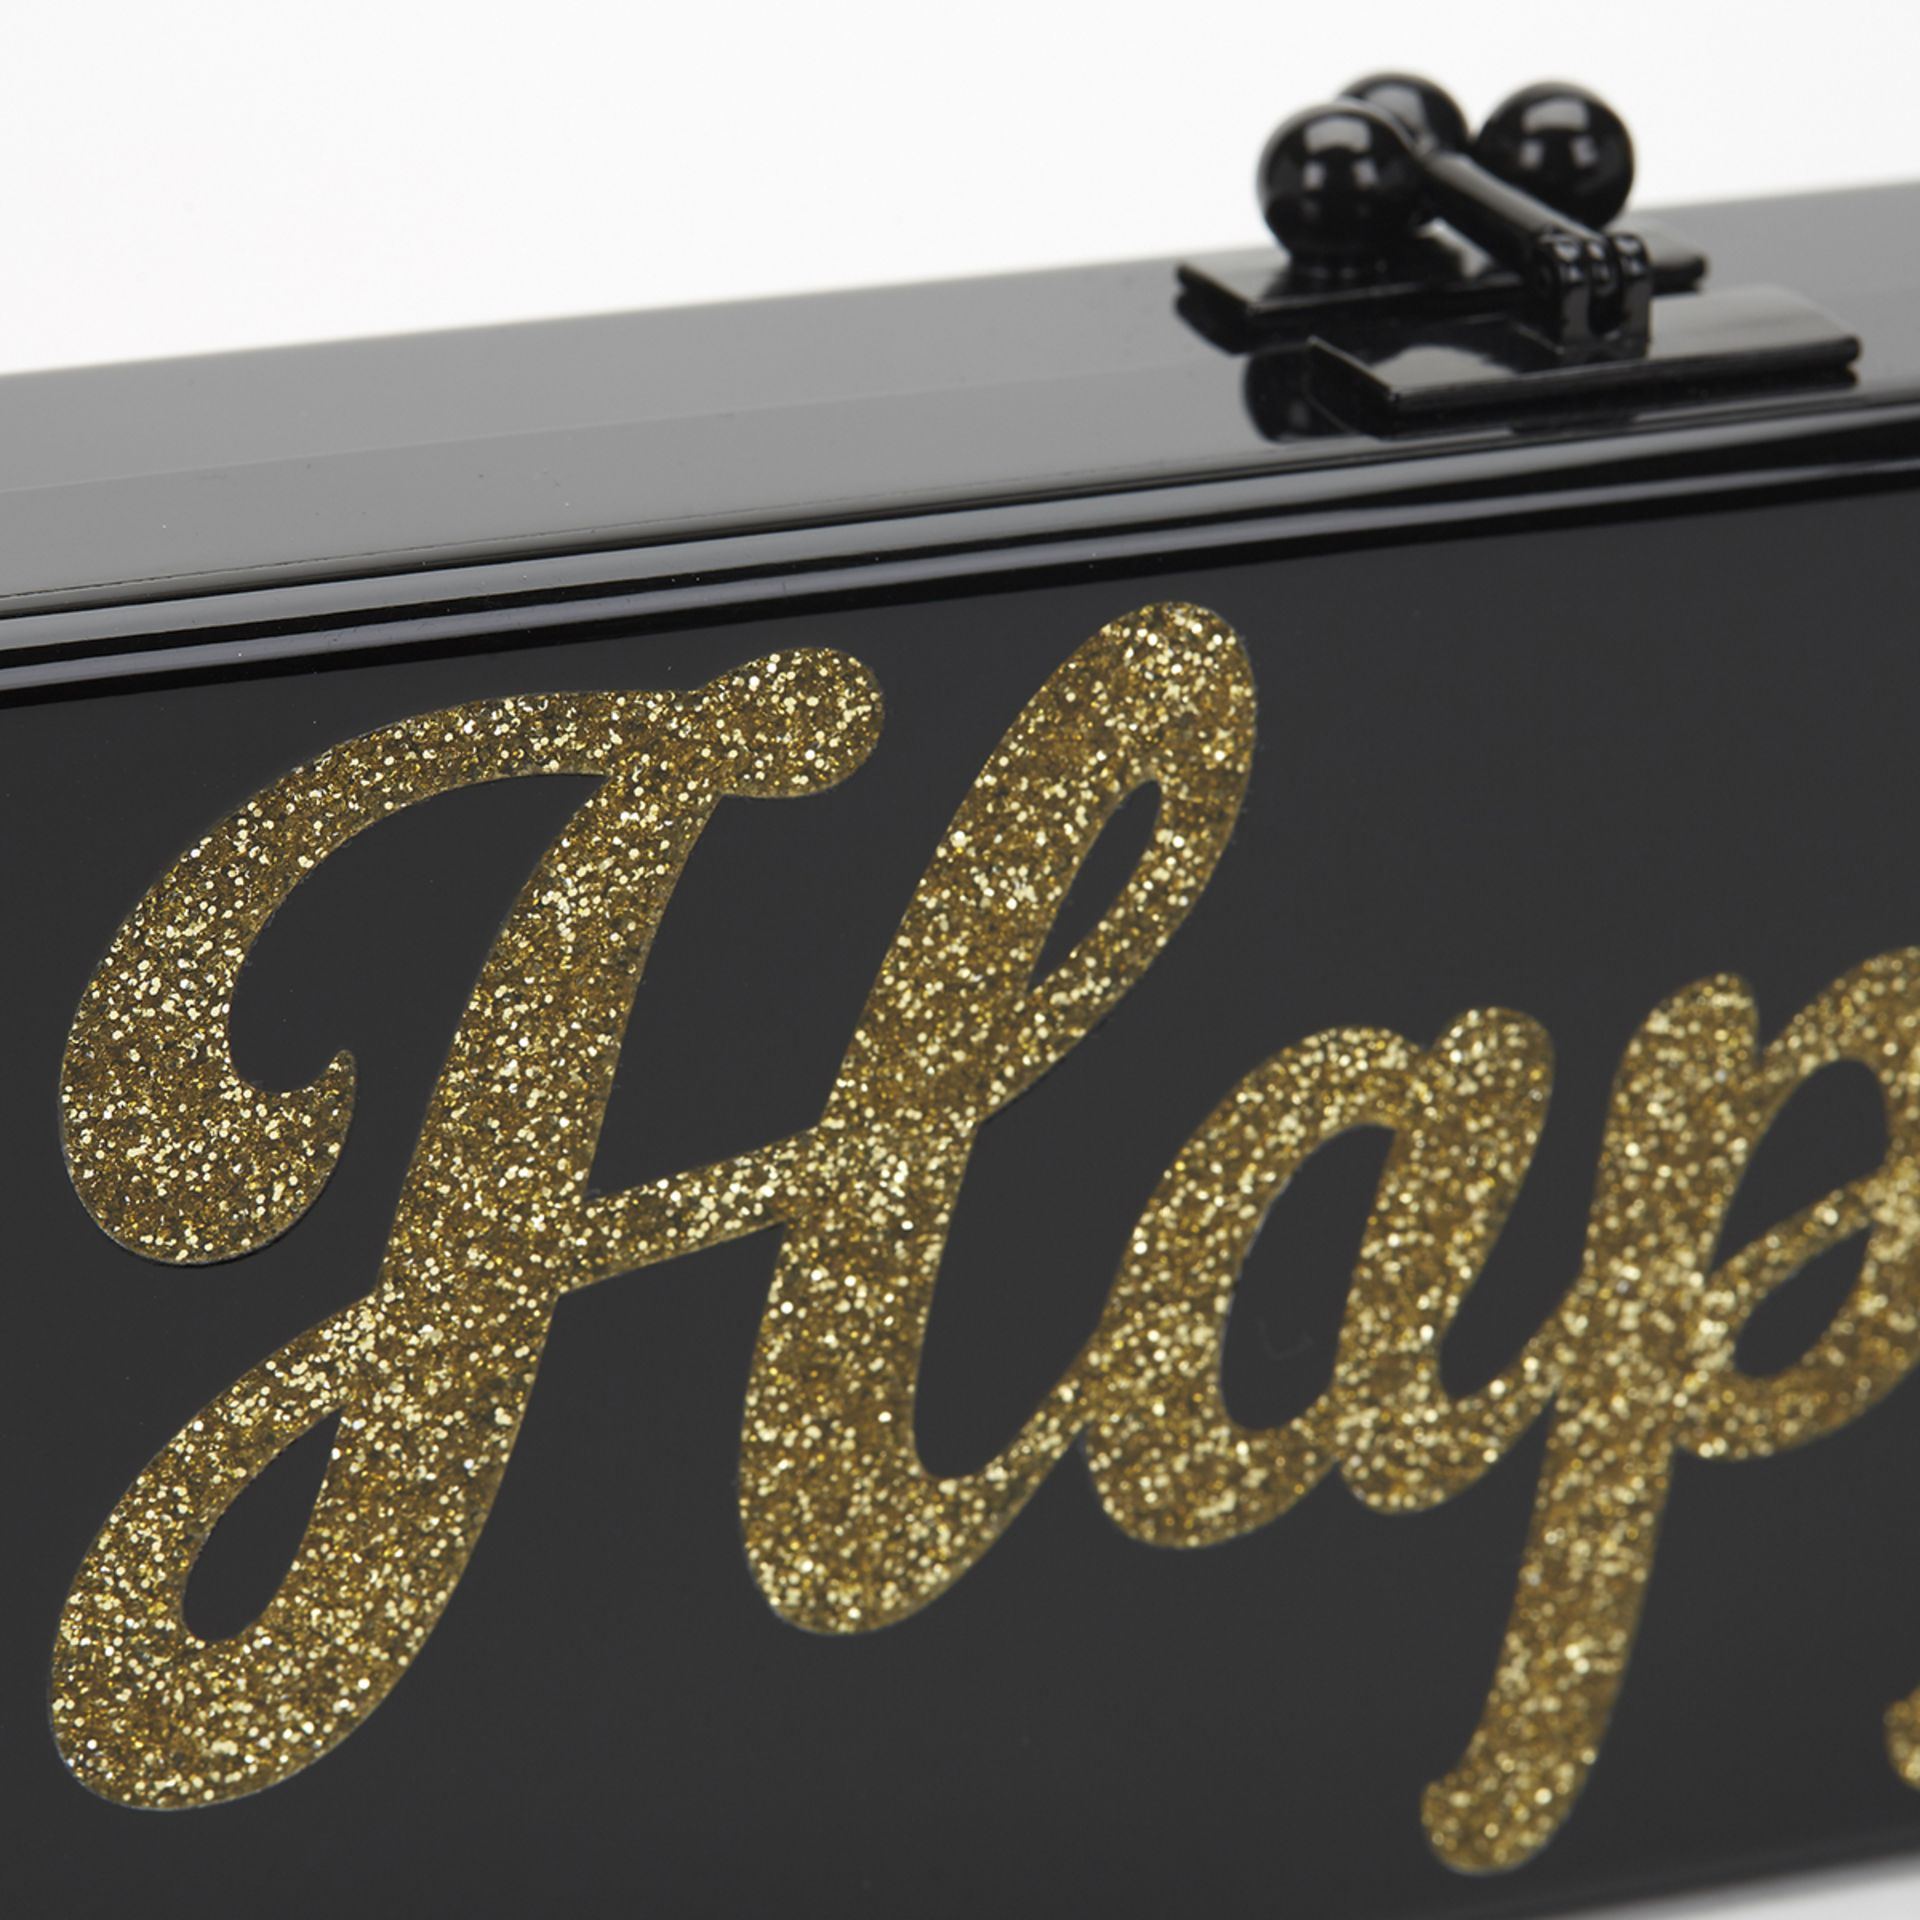 Edie Parker Black Glittered Acrylic Happy Box Clutch - Image 6 of 9